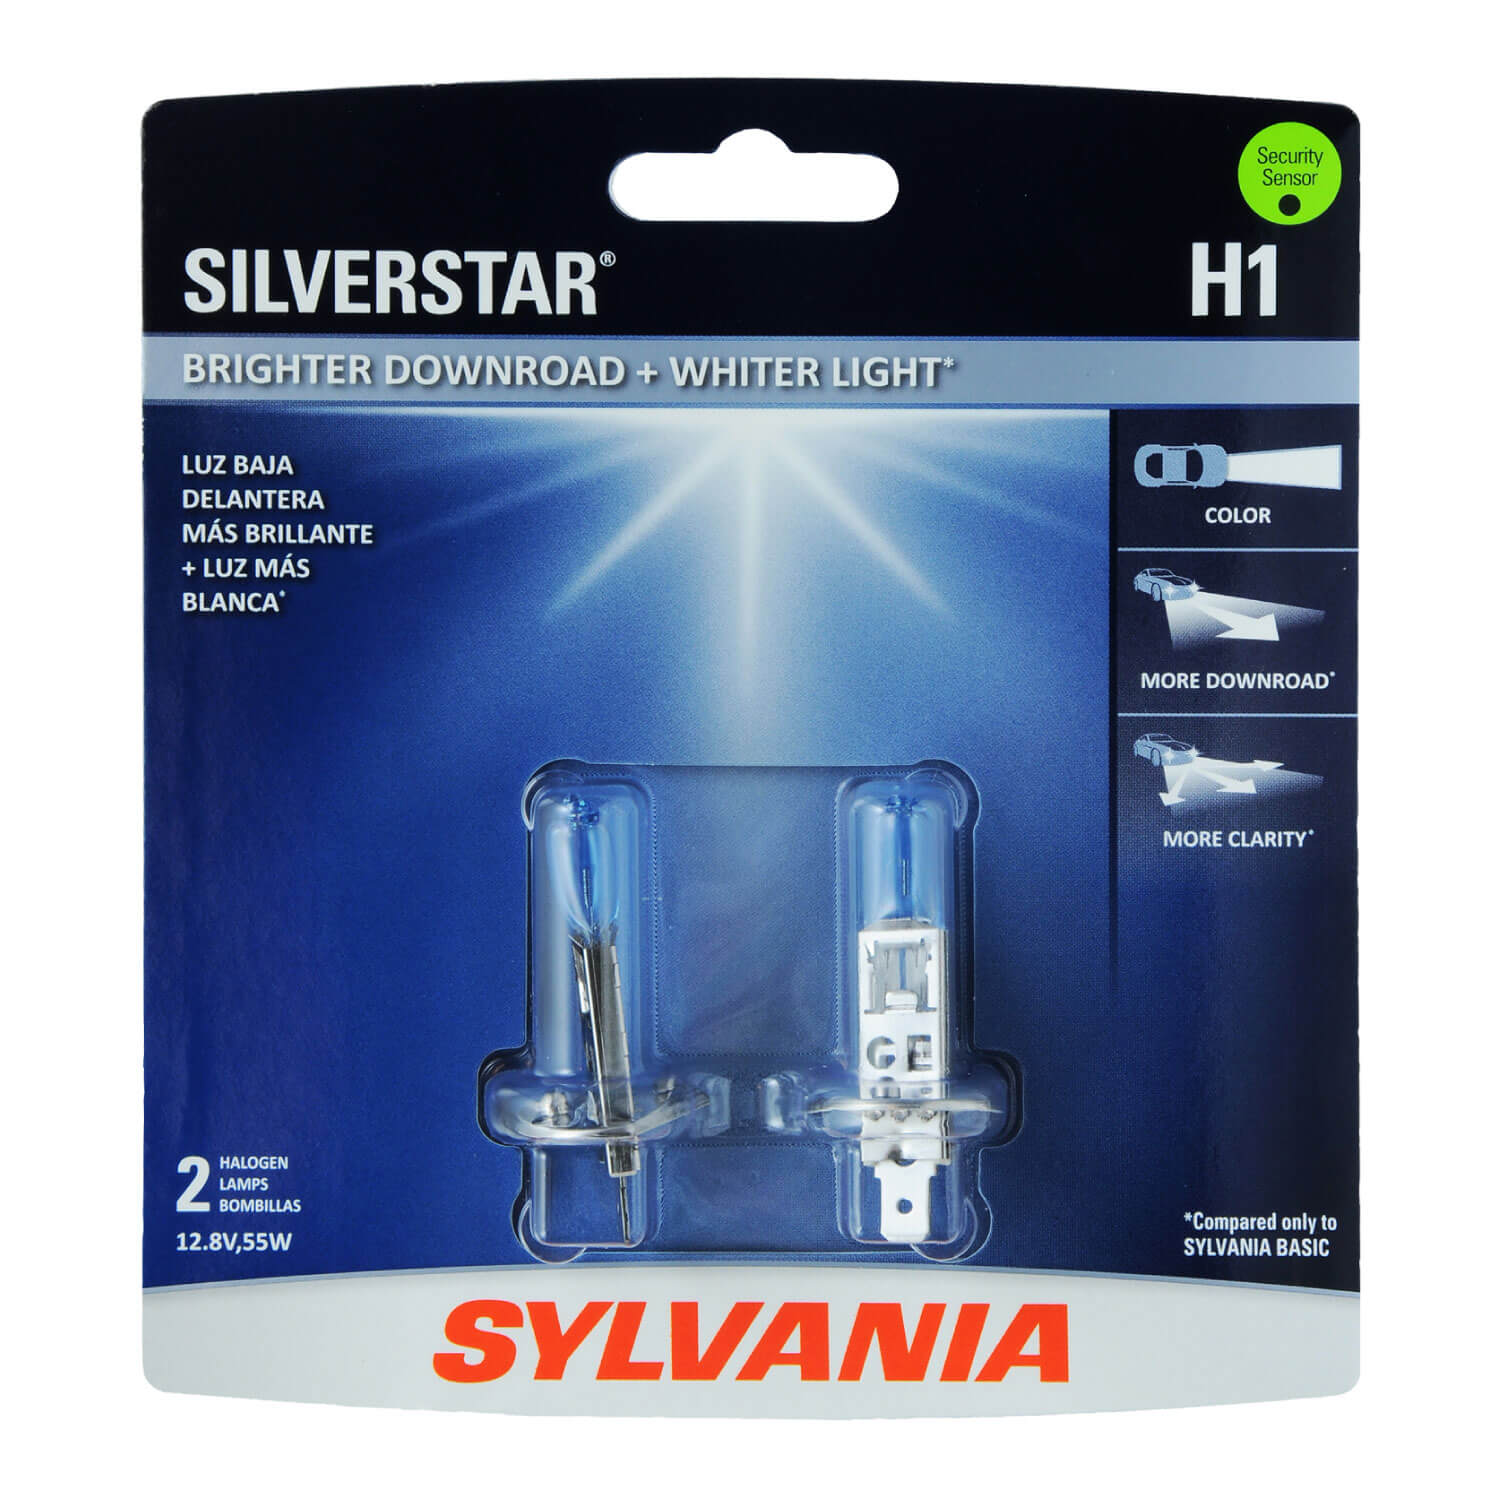 Details about   Sylvania Silverstar H1 55W Two BulbsHead Light High Beam Upgrade Replacement OE